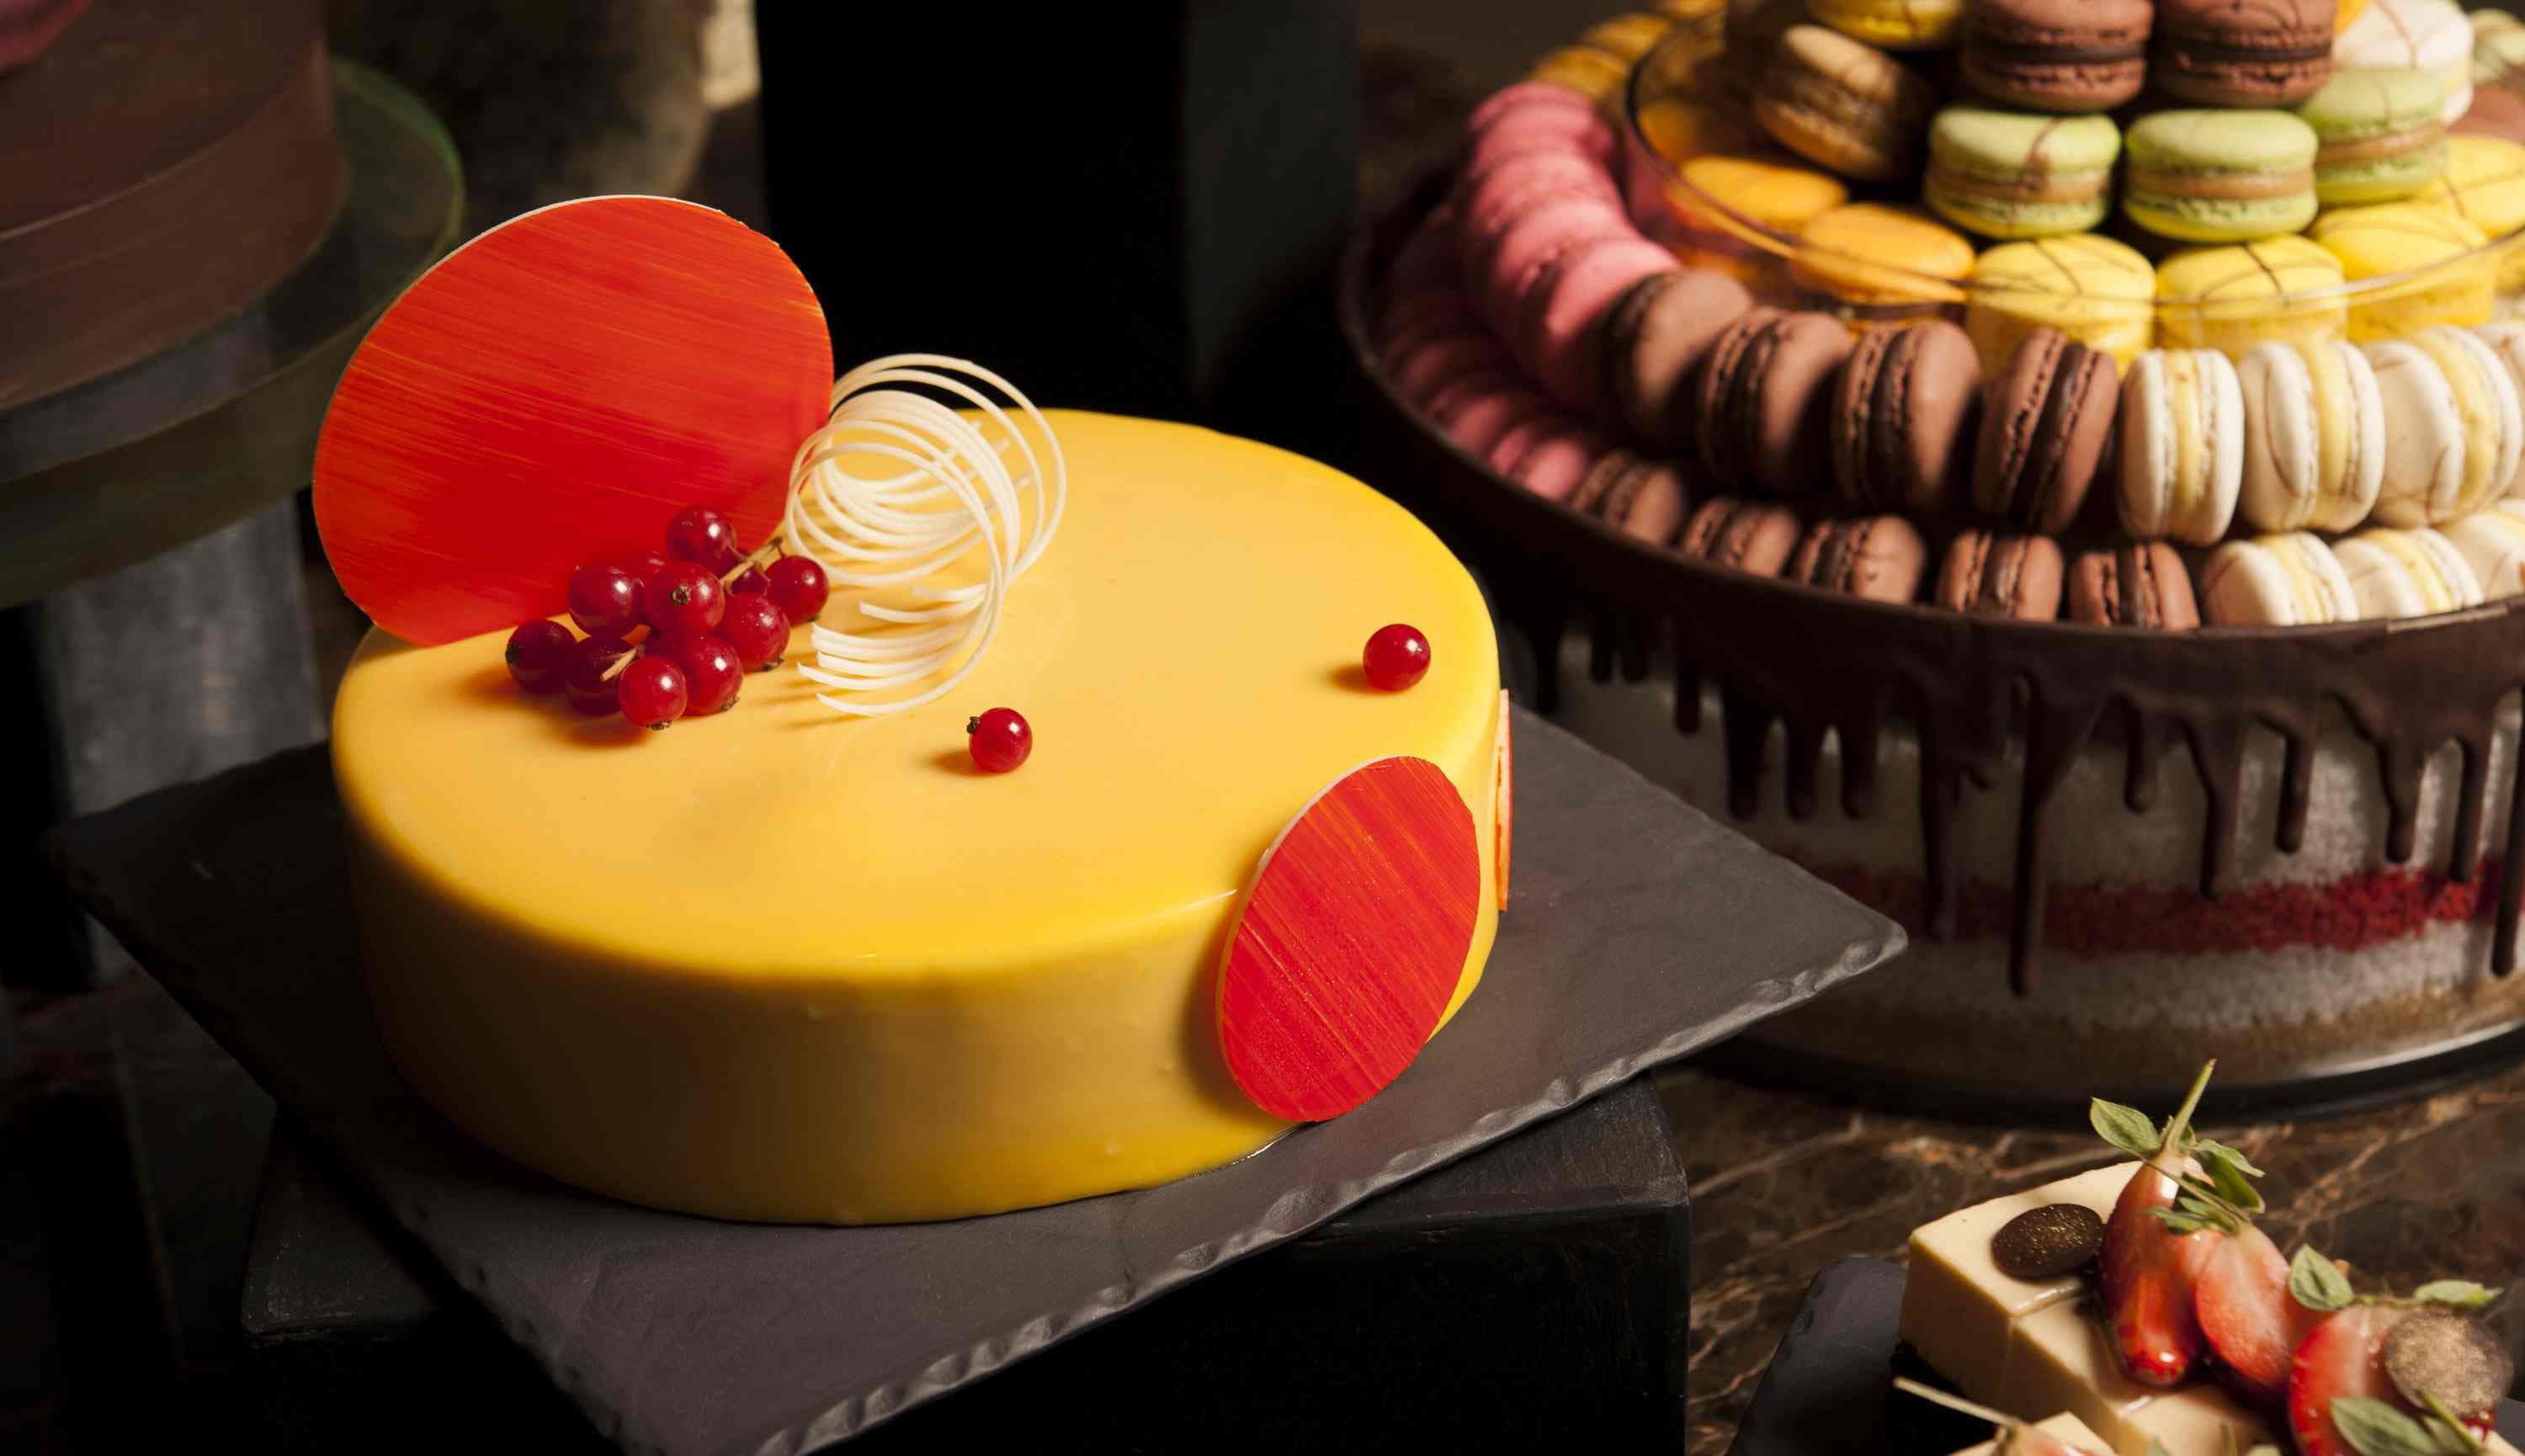 Club55 – Cheese and Chocolate Buffet, Passion Fruit White Chocolate Mousse Cake